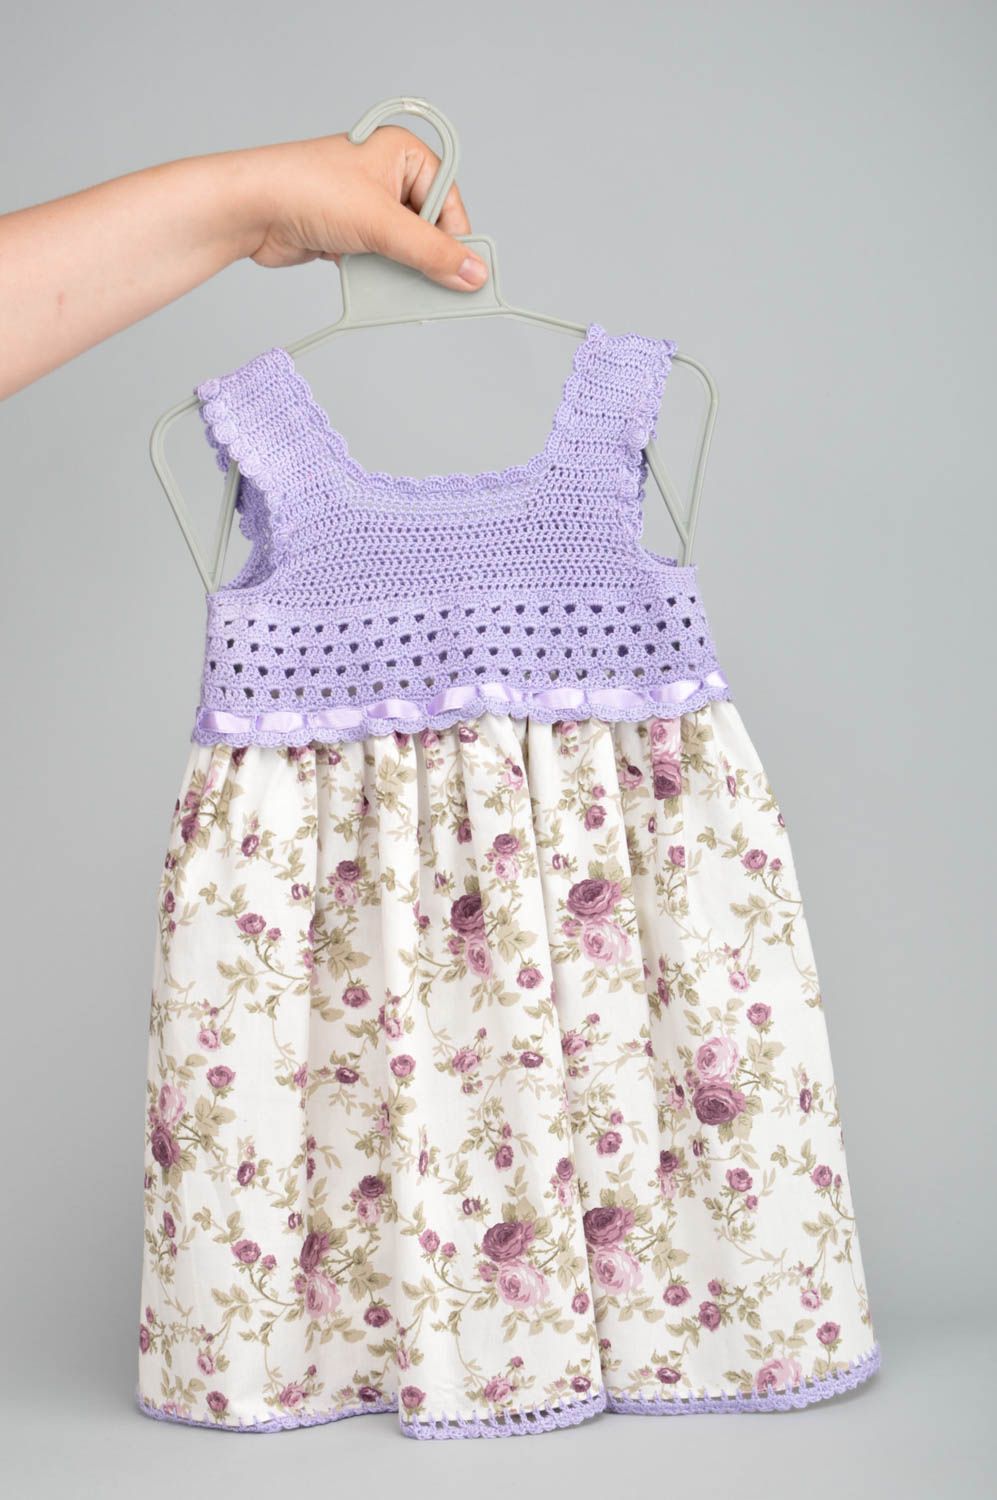 Beautiful handmade baby dress cute baby outfits fashion kids clothes for kids photo 2